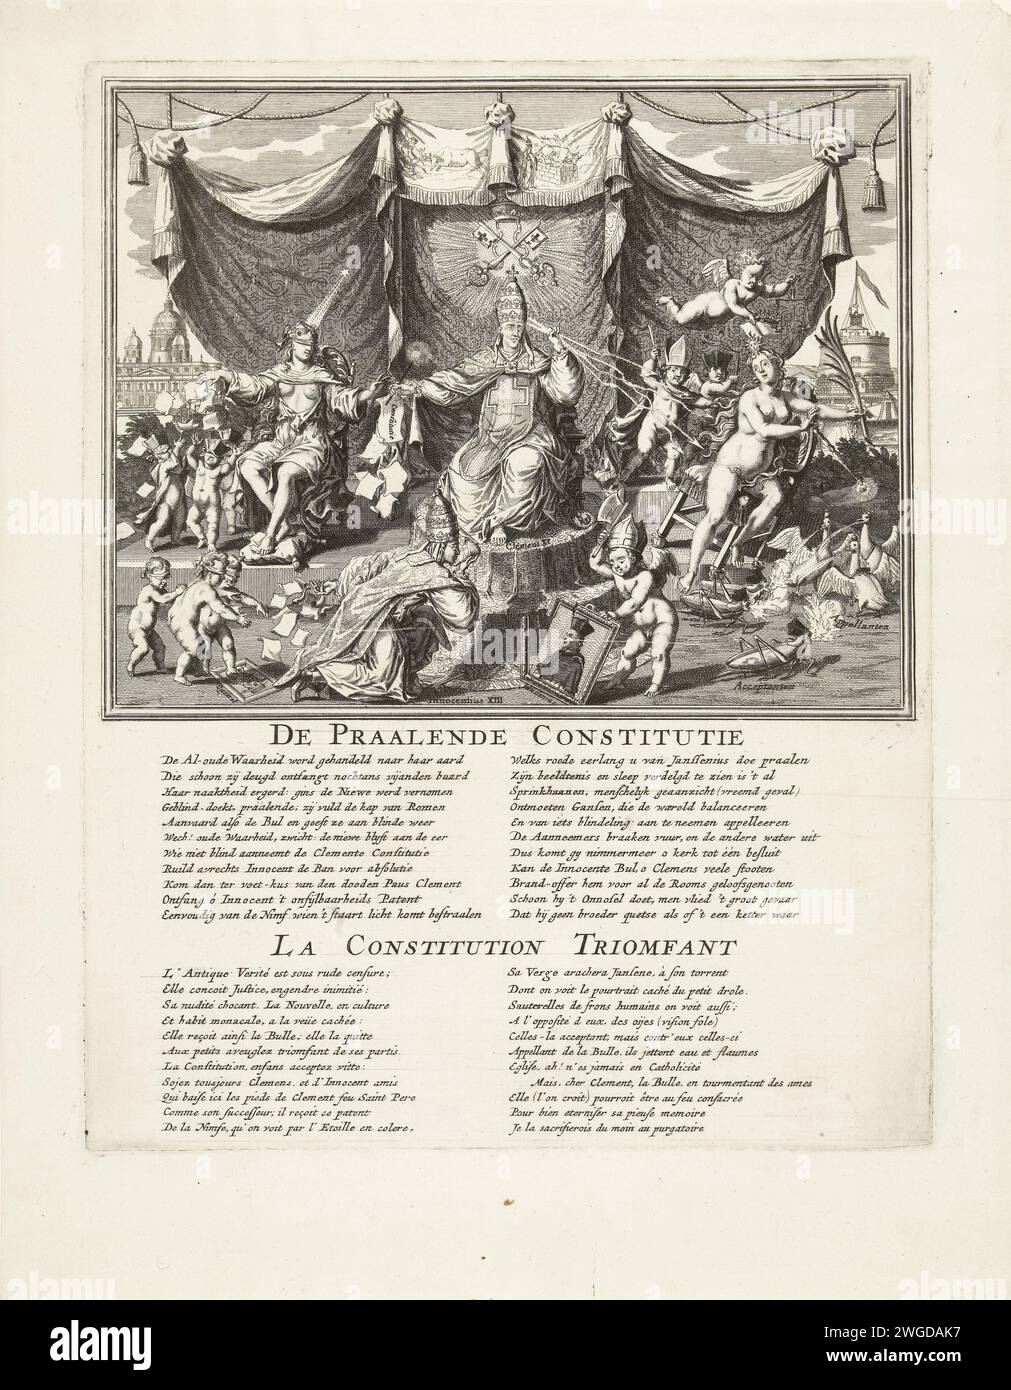 Allegorie op de Bul of Constitution Unigenitus van Paus Clement 11, ca. 1723-1724, 1723 - 1724 print Allegory on the Bul of Constitution Unigenitus of Pope Clemens XI regarding the infallibility of the Pope and against the ideas of the Jansenists, ca. 1723-1724. Central Pope Clemens XI on a throne, his feet are kissed by Pope Innocent XIII, on the left the blinded church, on the right the truth of her throne falls. Portraits of Quesnel and Janssenius are trampled or chopped. In the background Sint-Pieter and the Engelenburcht in Rome. In the captions verses in Dutch and French. Northern Nether Stock Photo